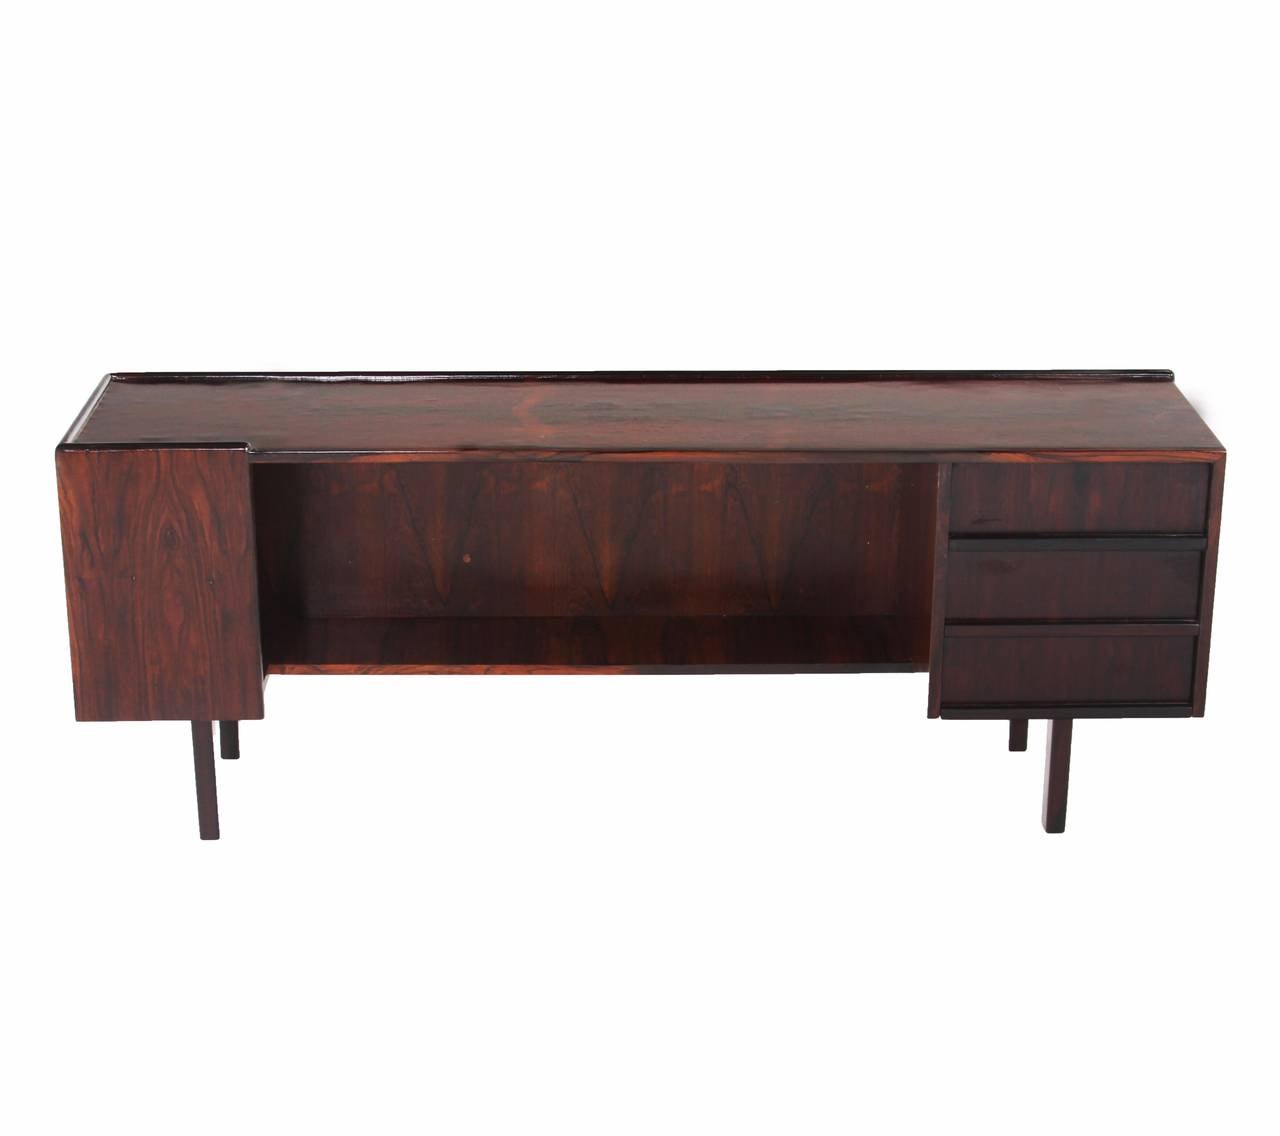 A rare Brazilian exotic hardwood credenza with four legs, one section of drawers and a storage shelf. 

Many pieces are stored in our warehouse, so please click on 